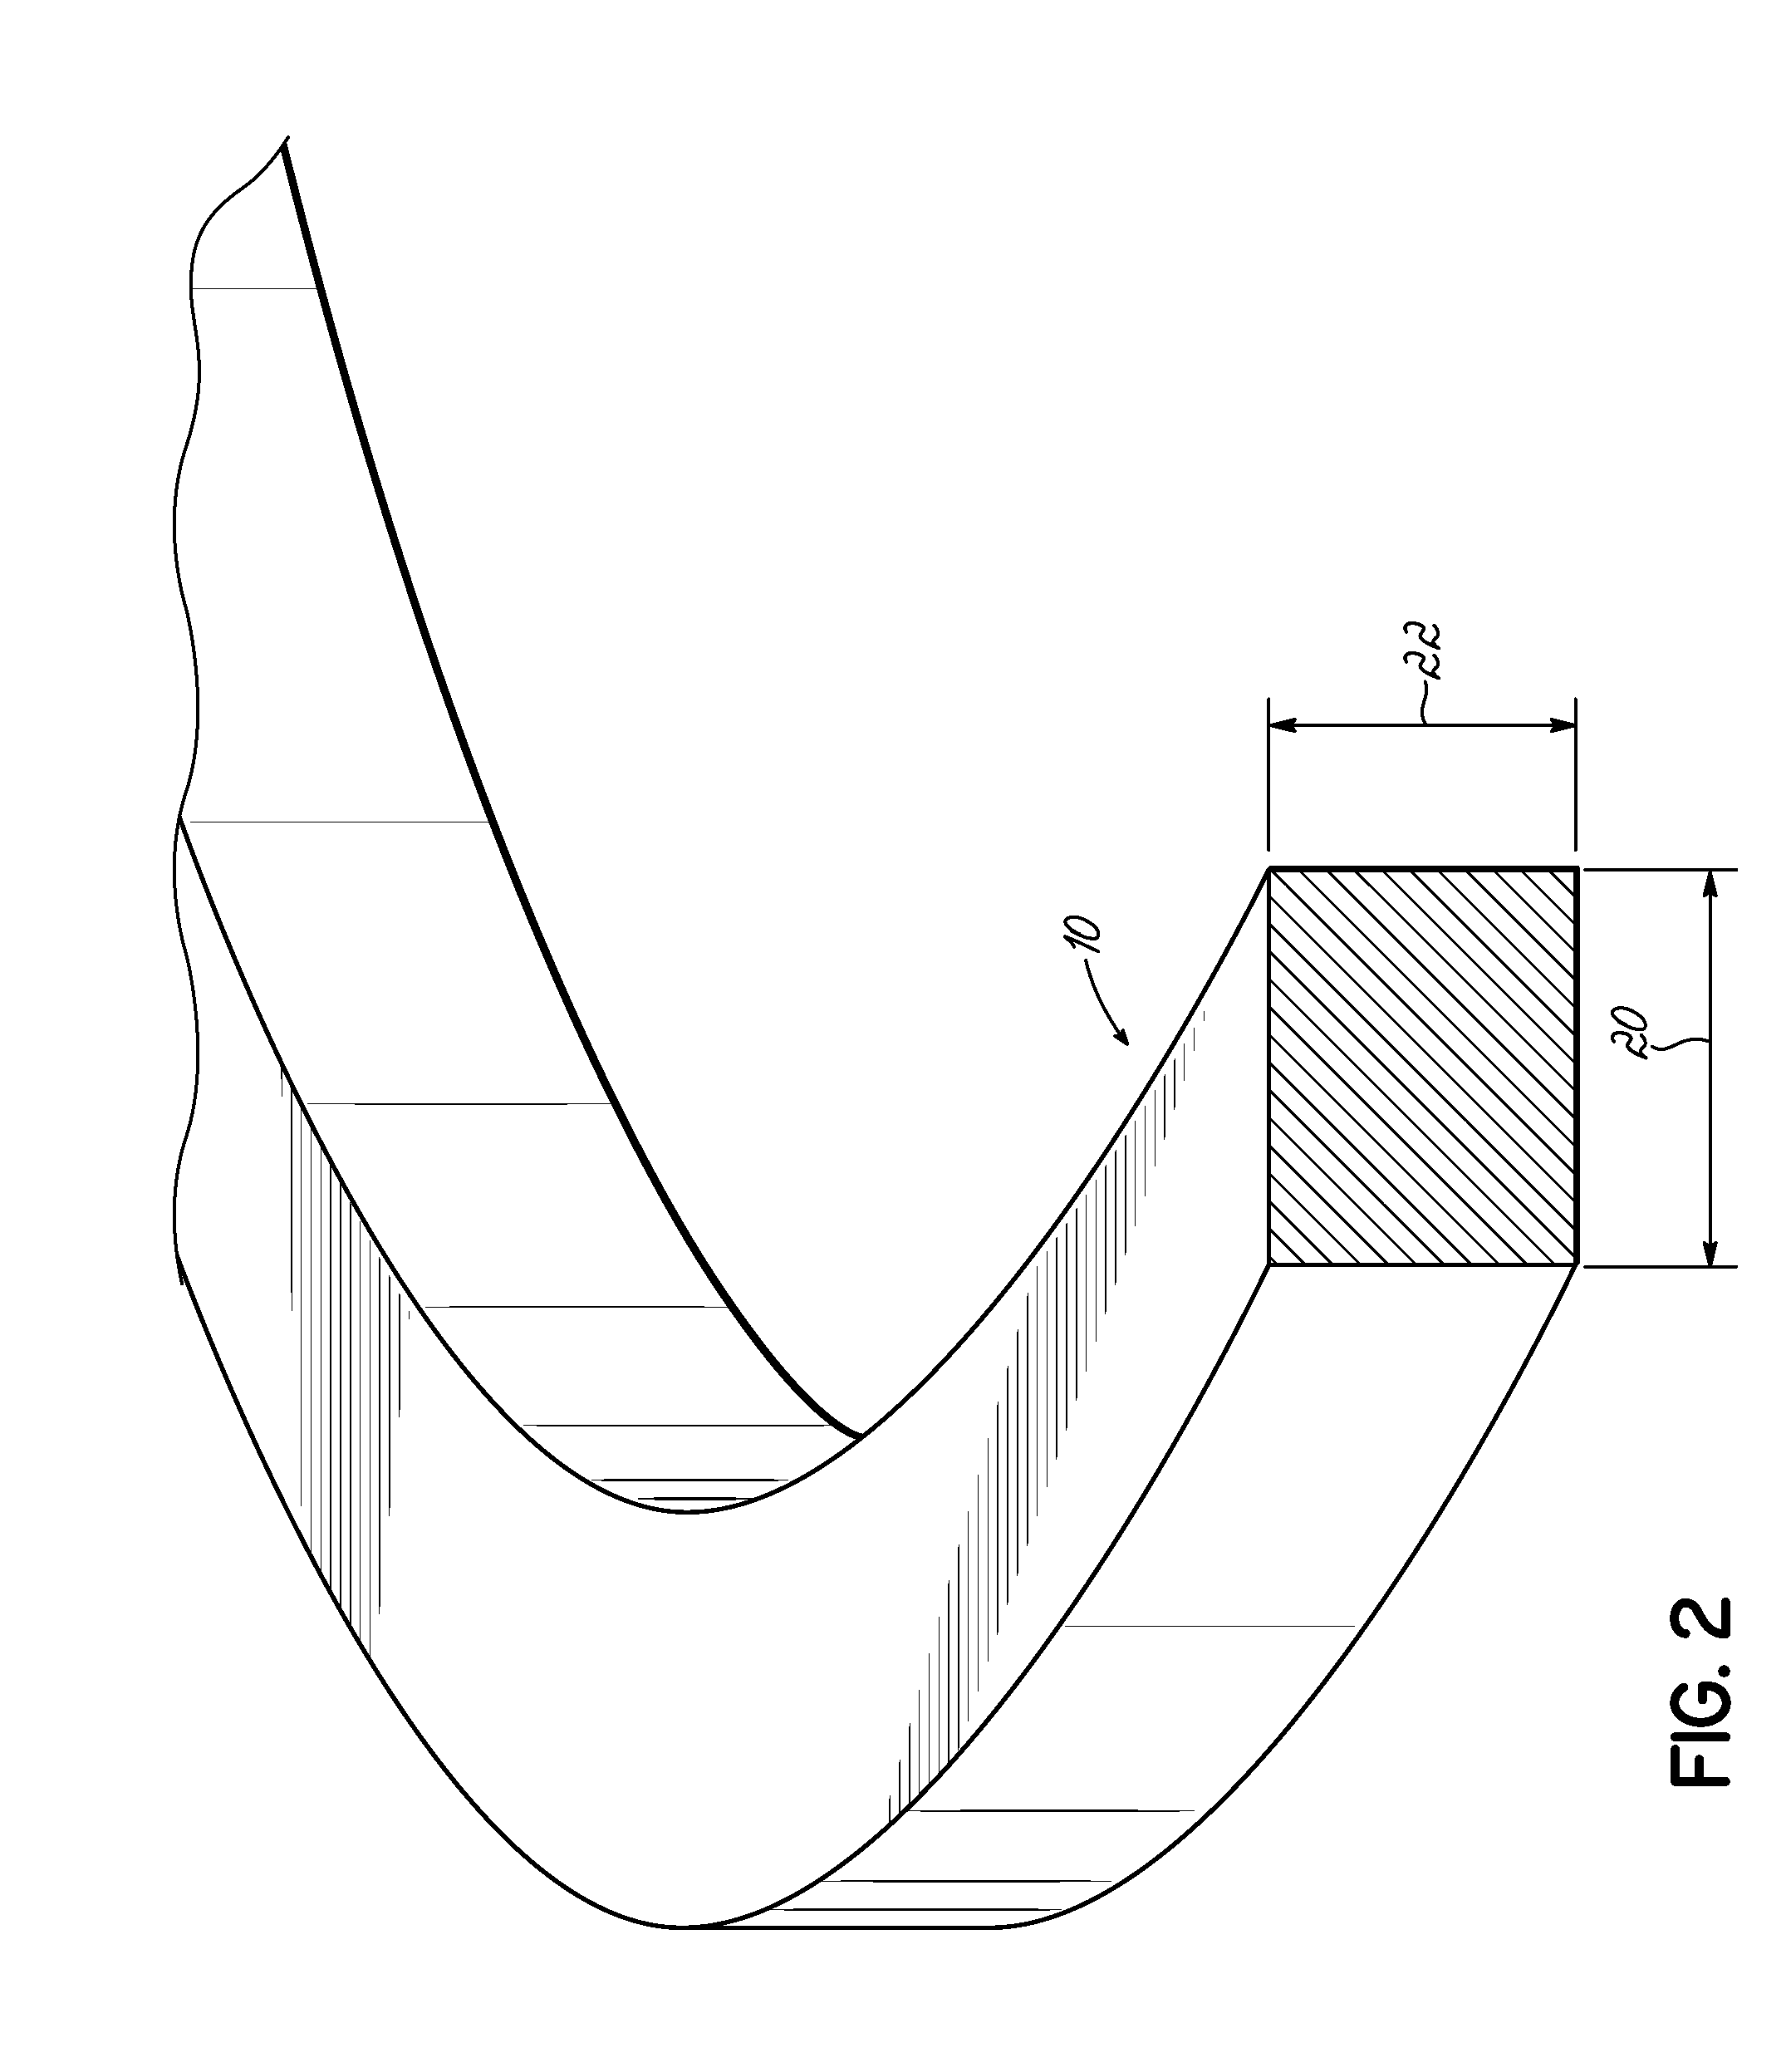 Orthodontic appliances and methods of making and using same